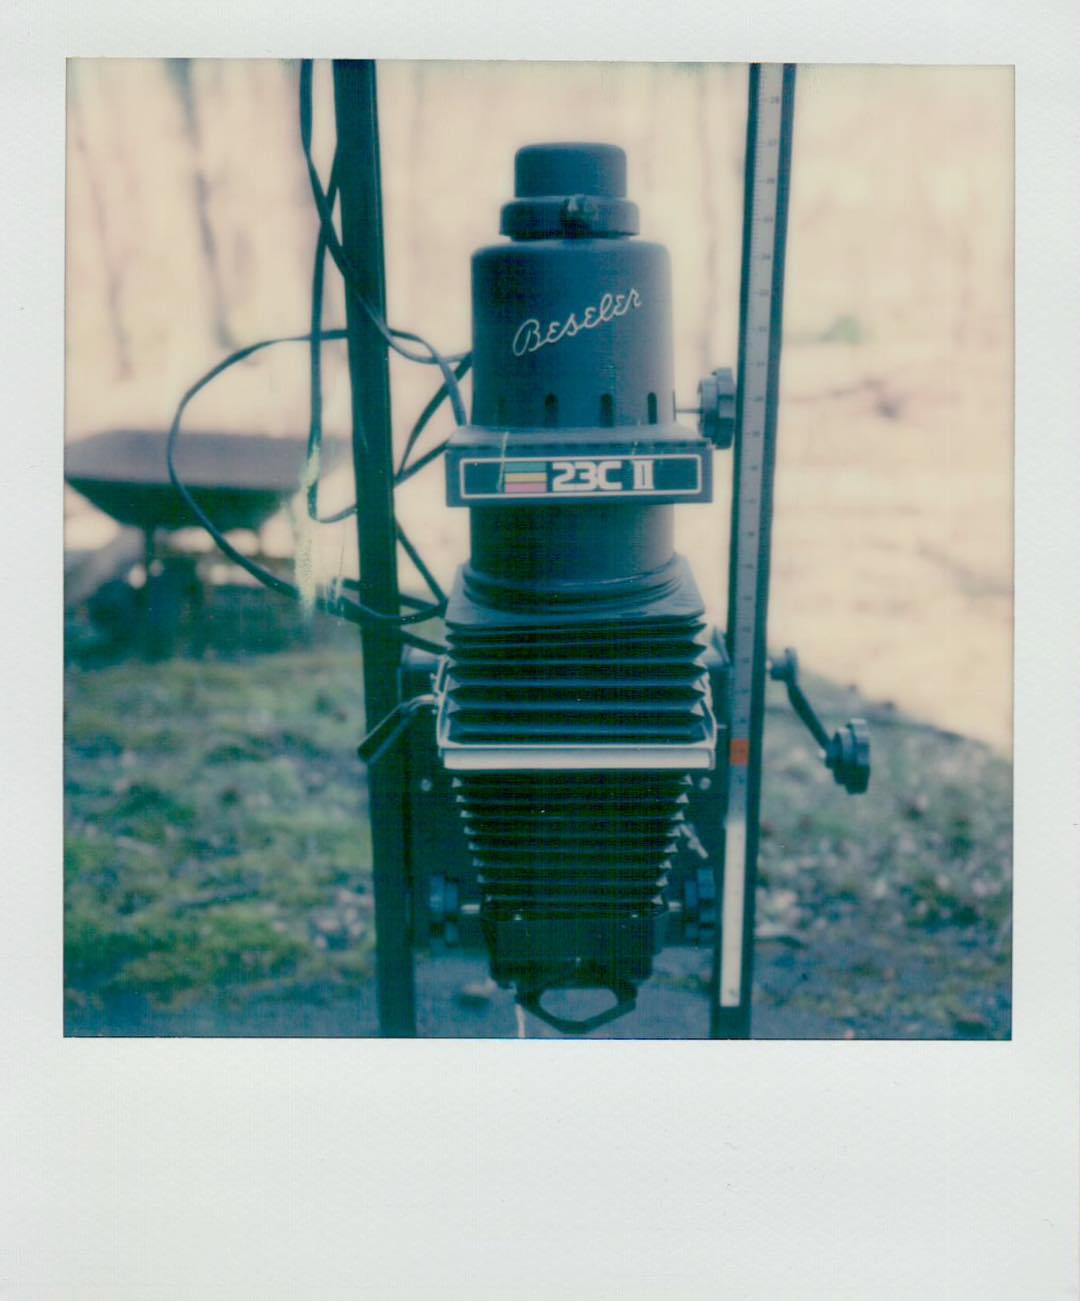 New toy. Found on Craigslist for $40 in the next town over. Needs negative carriers, but looks otherwise ready to go. #polaroid #sx70 #enlarger #roidweek #irony